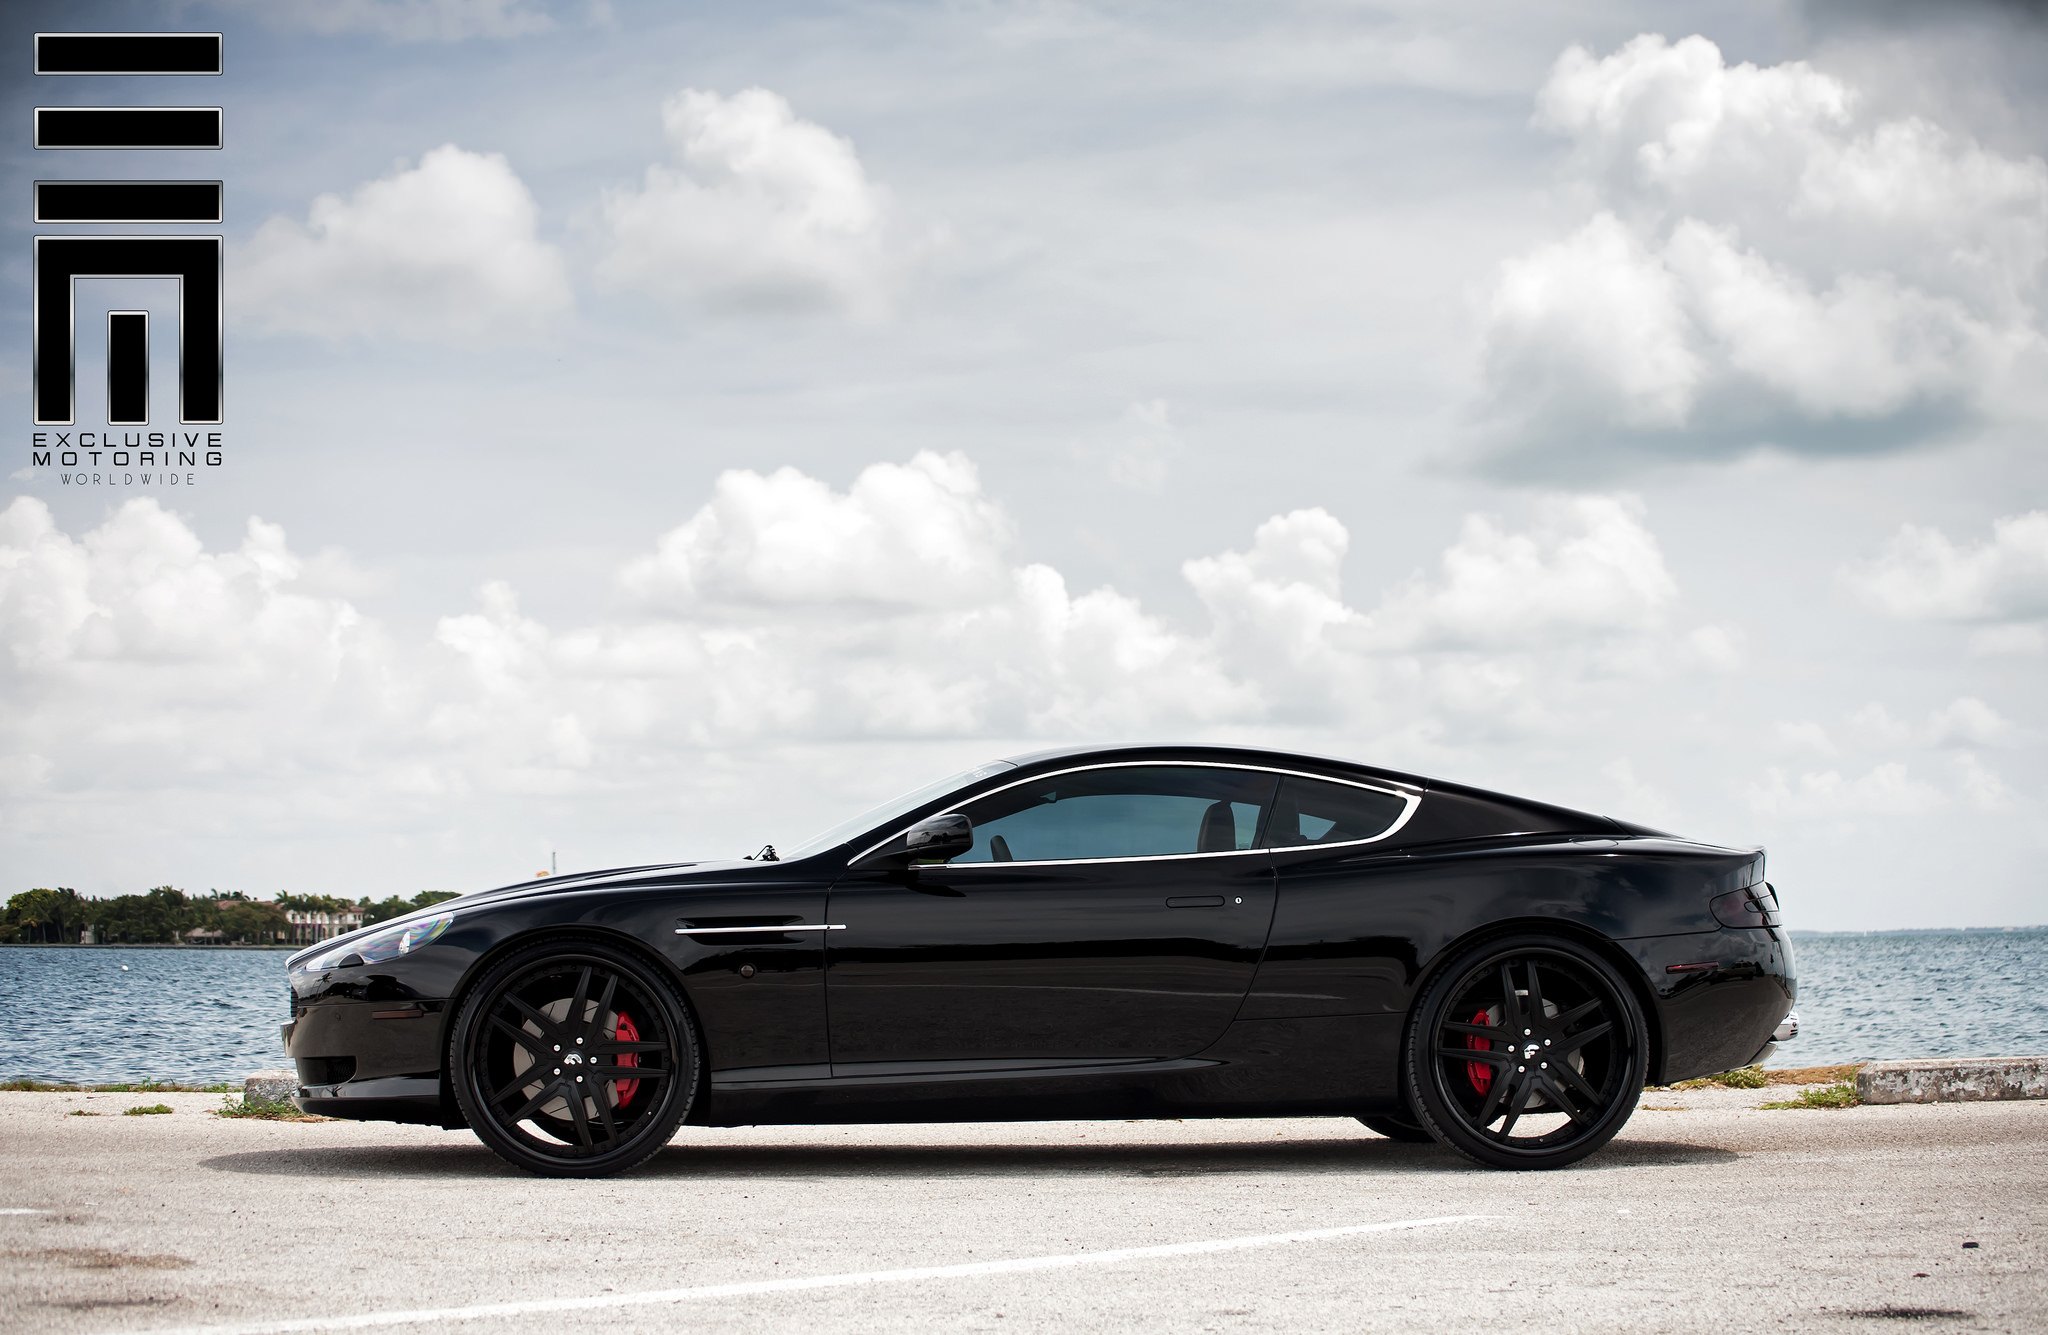 Aston Martin DB9 on a set of wheels with custom caliper cover - Photo by Exclusive Motoring